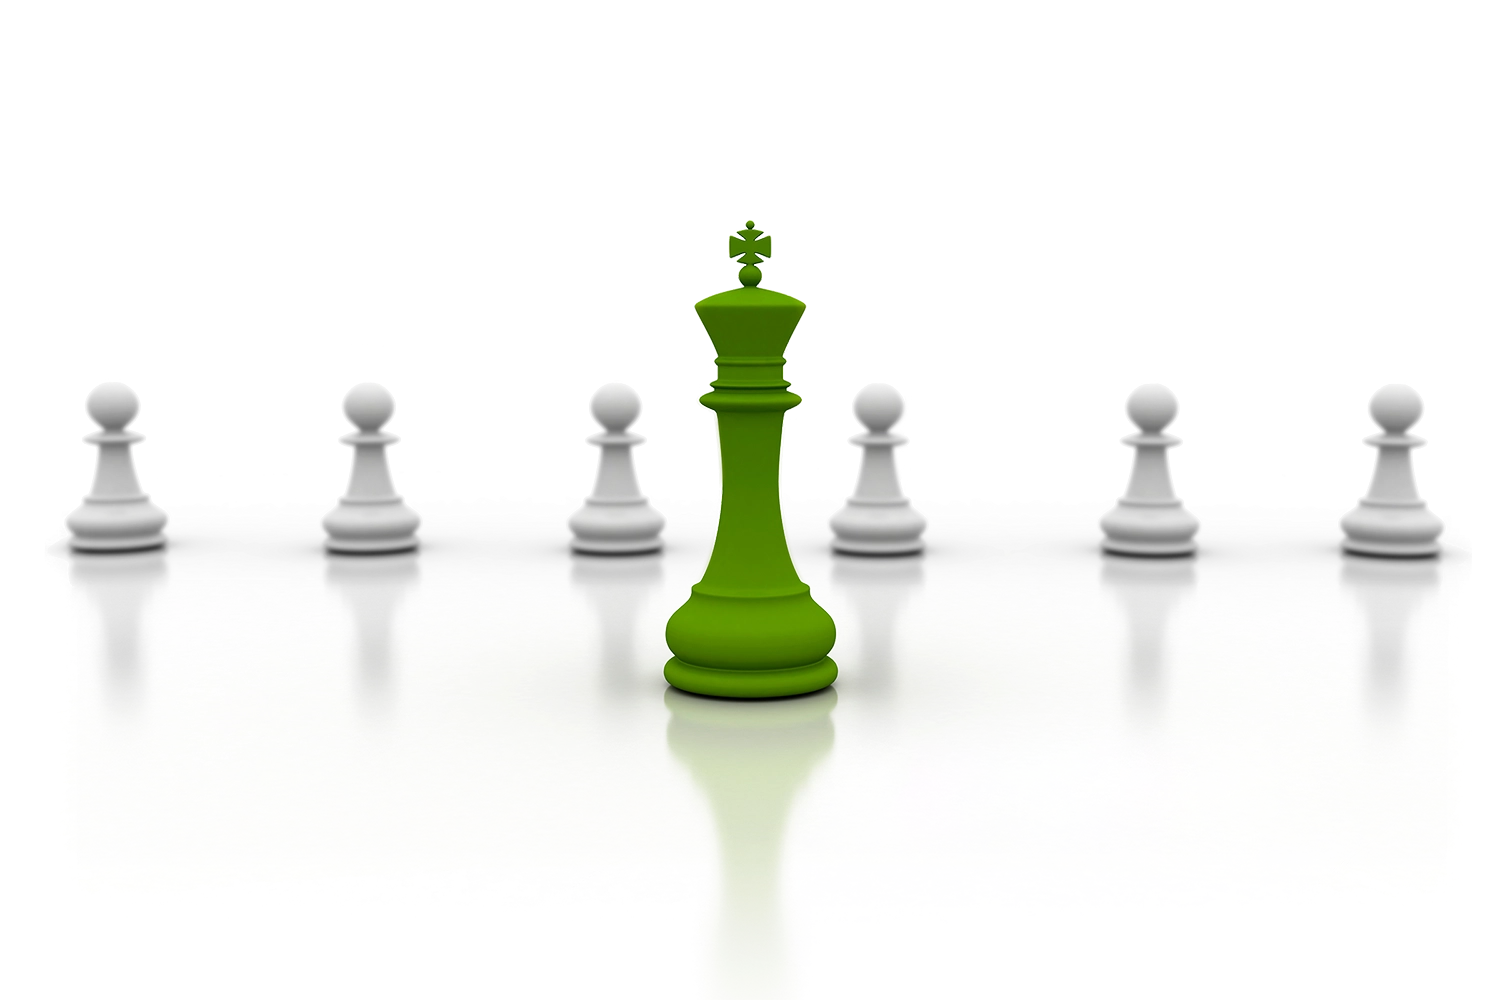 A green king chess piece stands in front of 6 white pawns